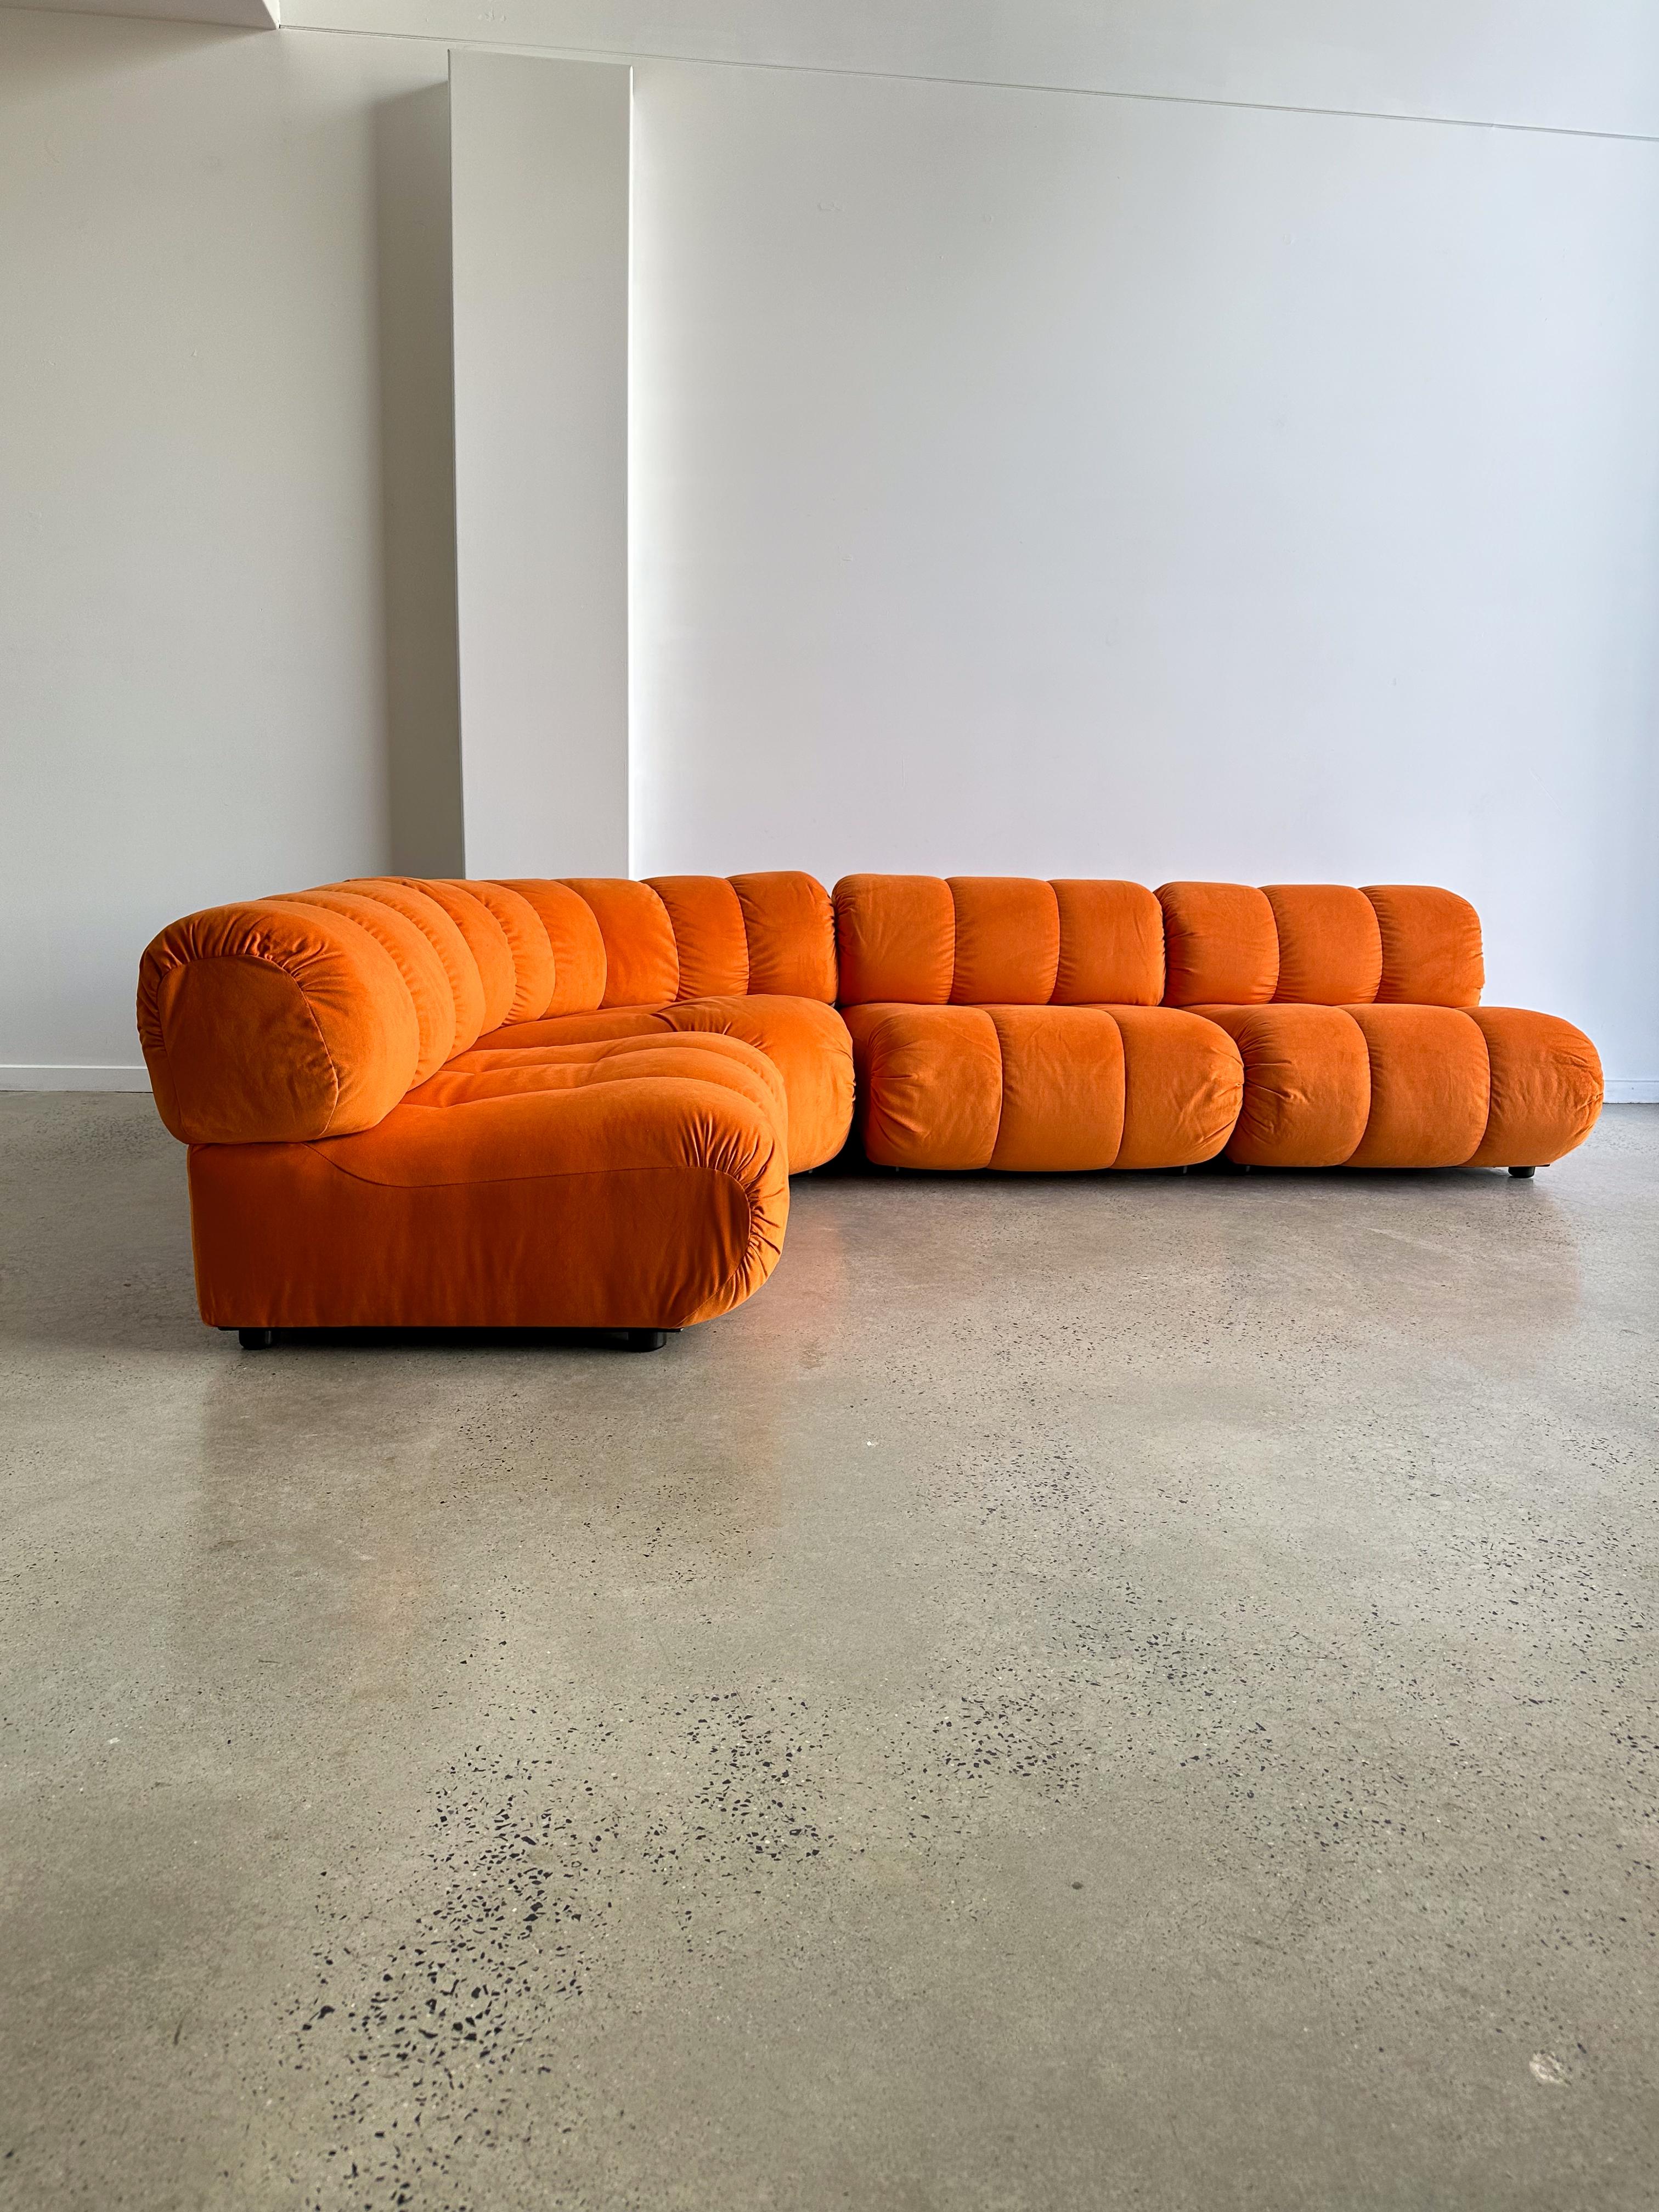 Italian Mid Century Modern orange set of four modular sofa by Giuseppe Munari for Poltronova 1970s.

Newly professionally reupholstered in Italy with Orange fabric. 

A modular sofa is a versatile seating solution that consists of individual